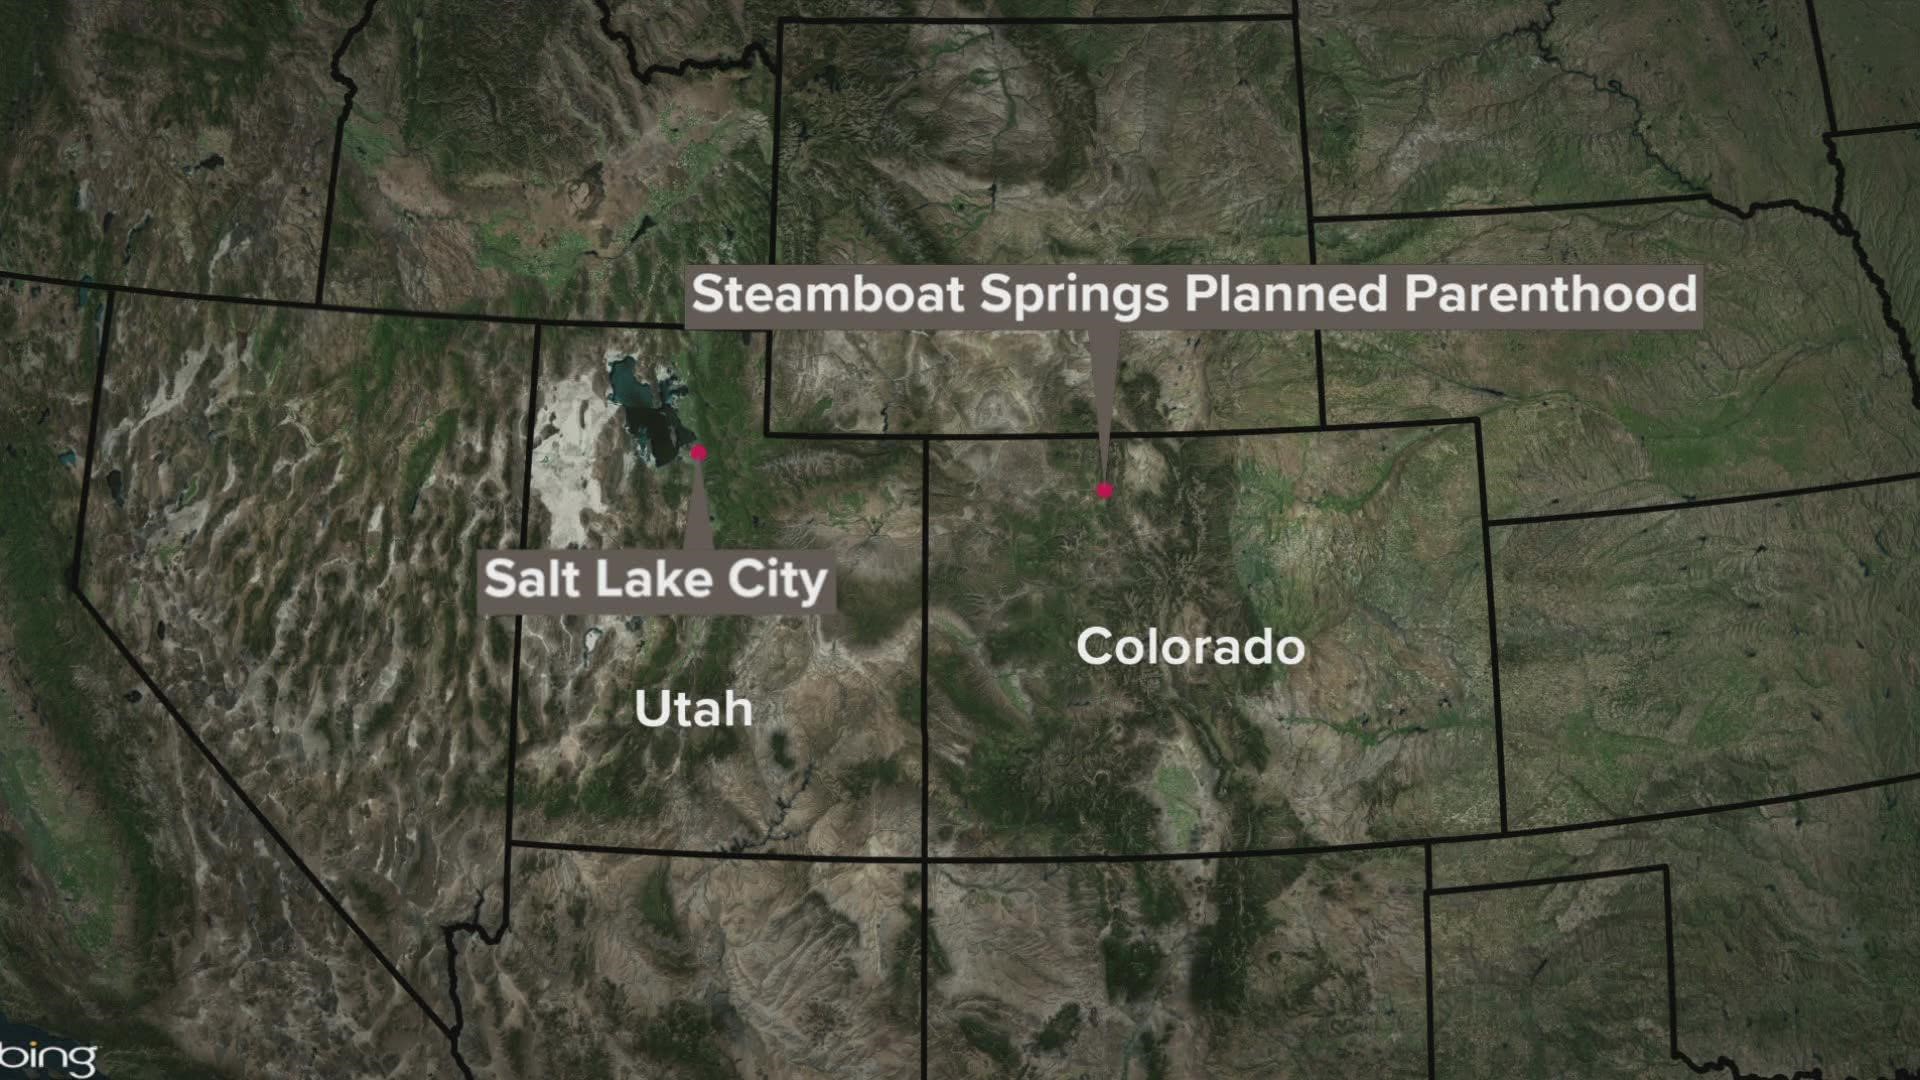 The lone Planned Parenthood in Steamboat Springs closed abruptly last week. It was one of a few abortion care providers in Northwest Colorado.